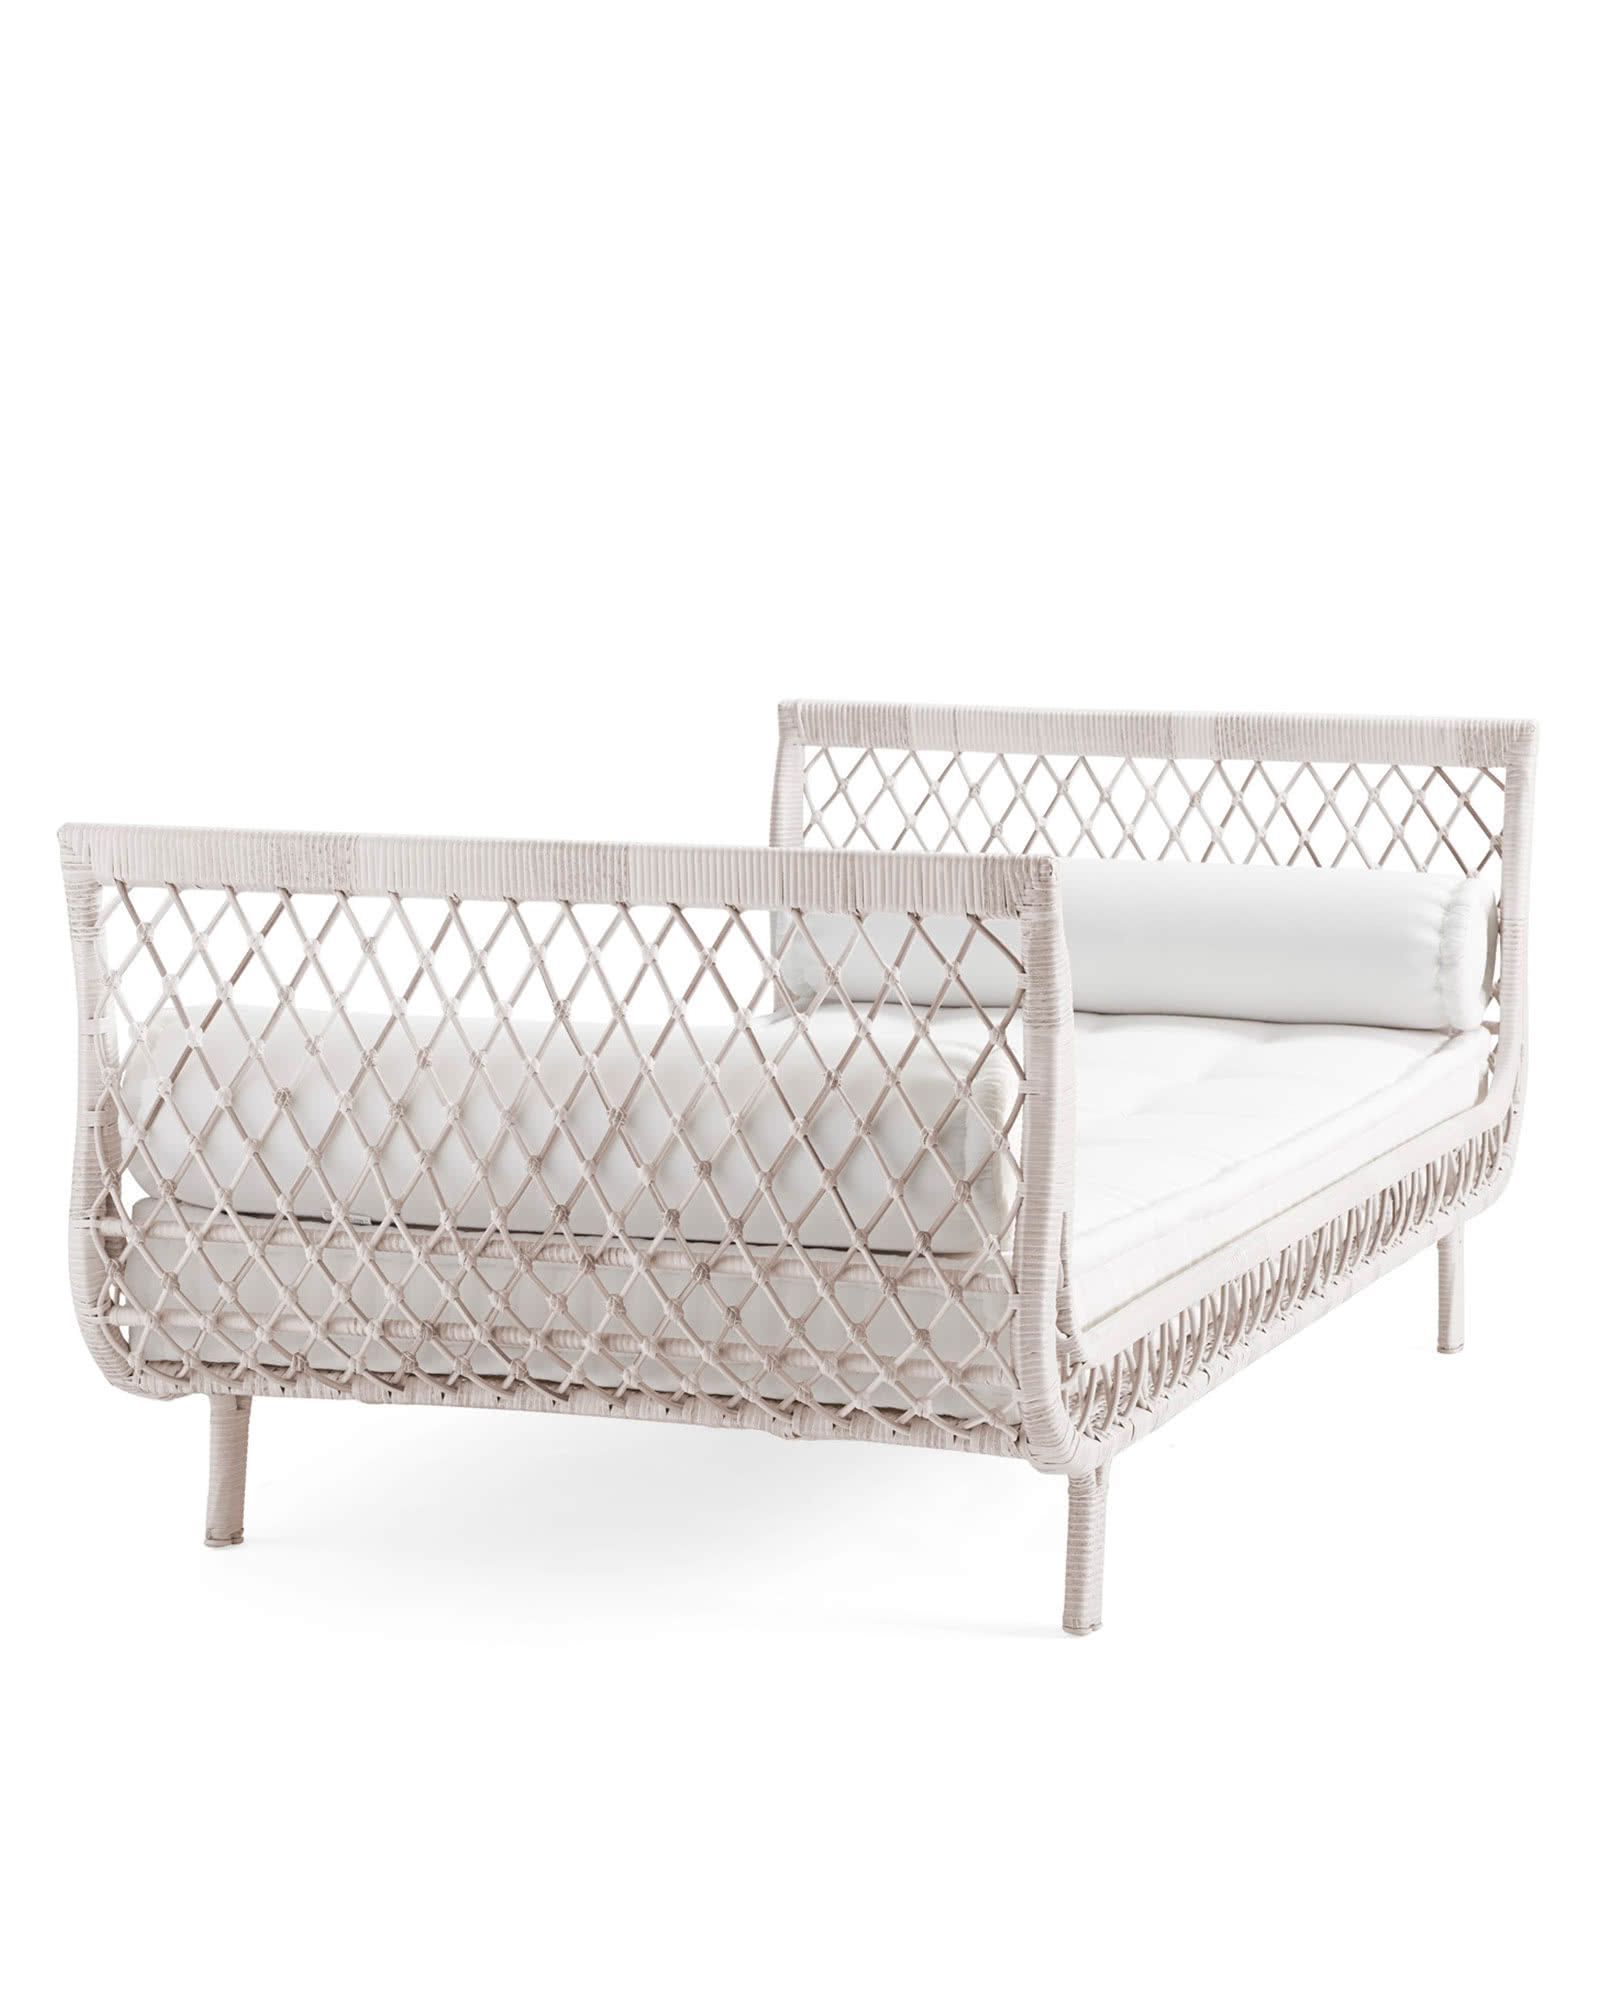 Preferred Serena & Lily Capistrano Outdoor Daybed – Driftwood In 2019 Pertaining To Bishop Daybeds (View 11 of 25)